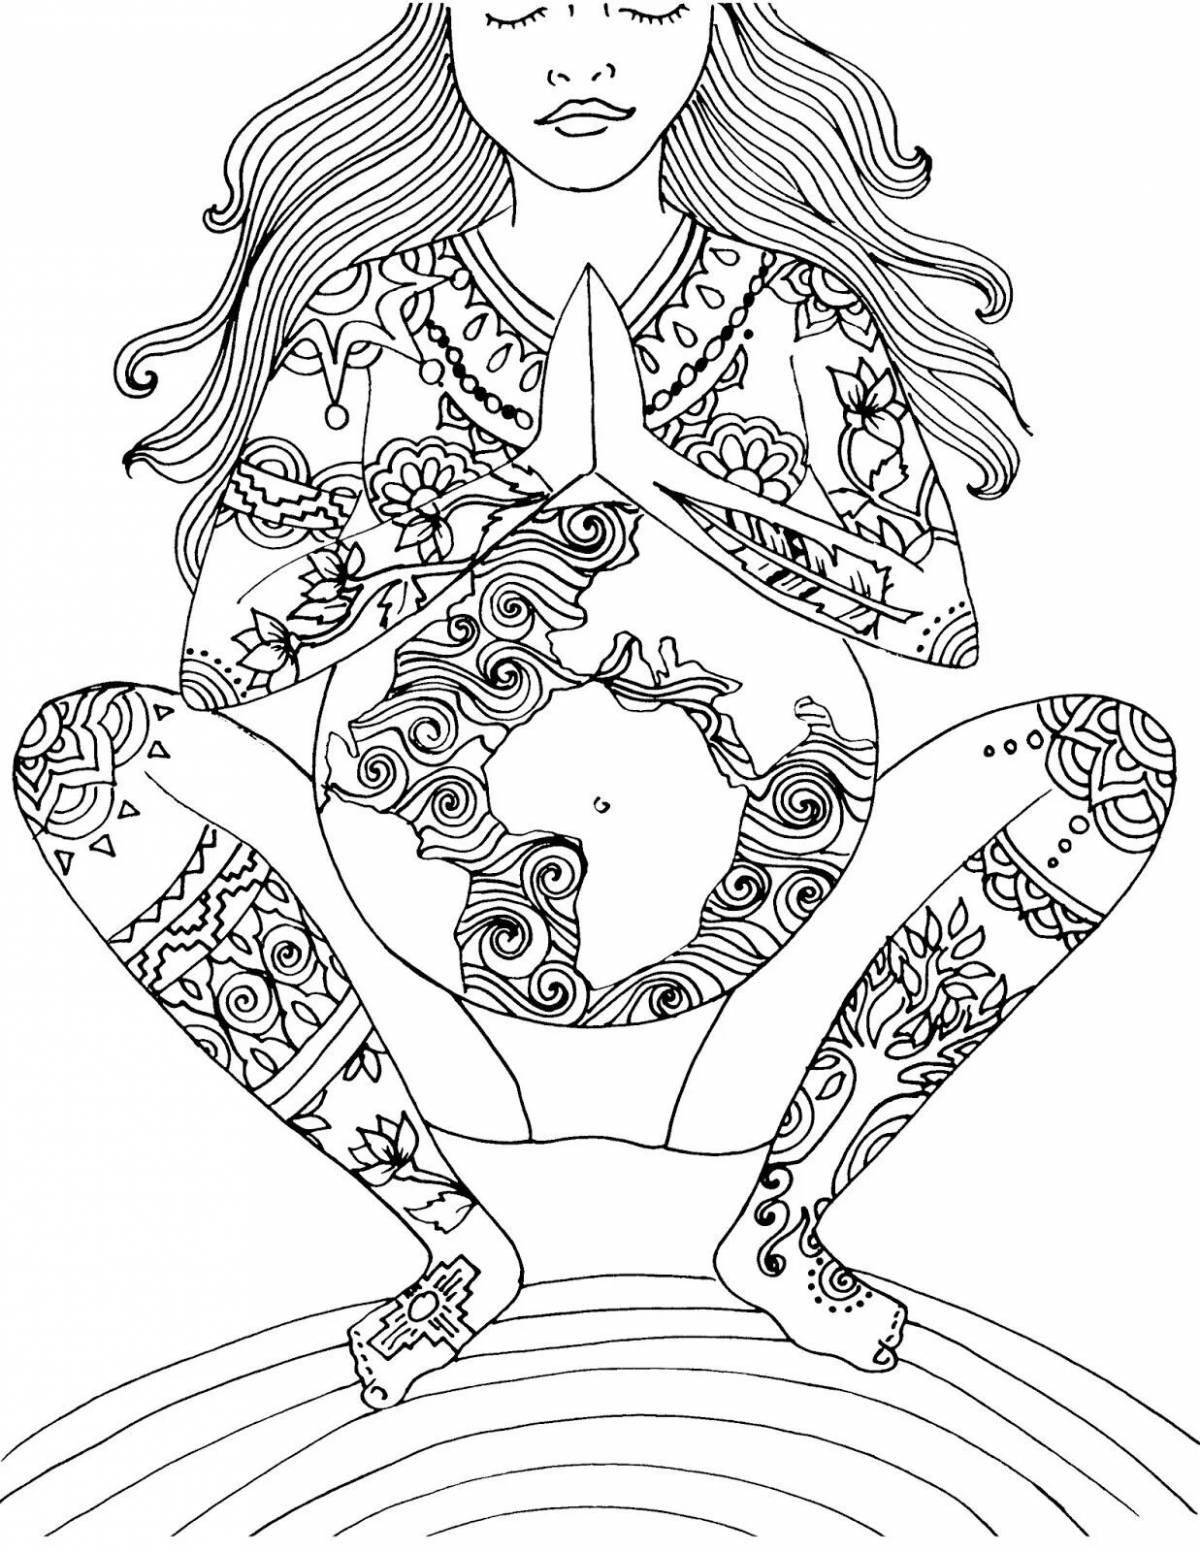 Shining Pregnancy Coloring Page